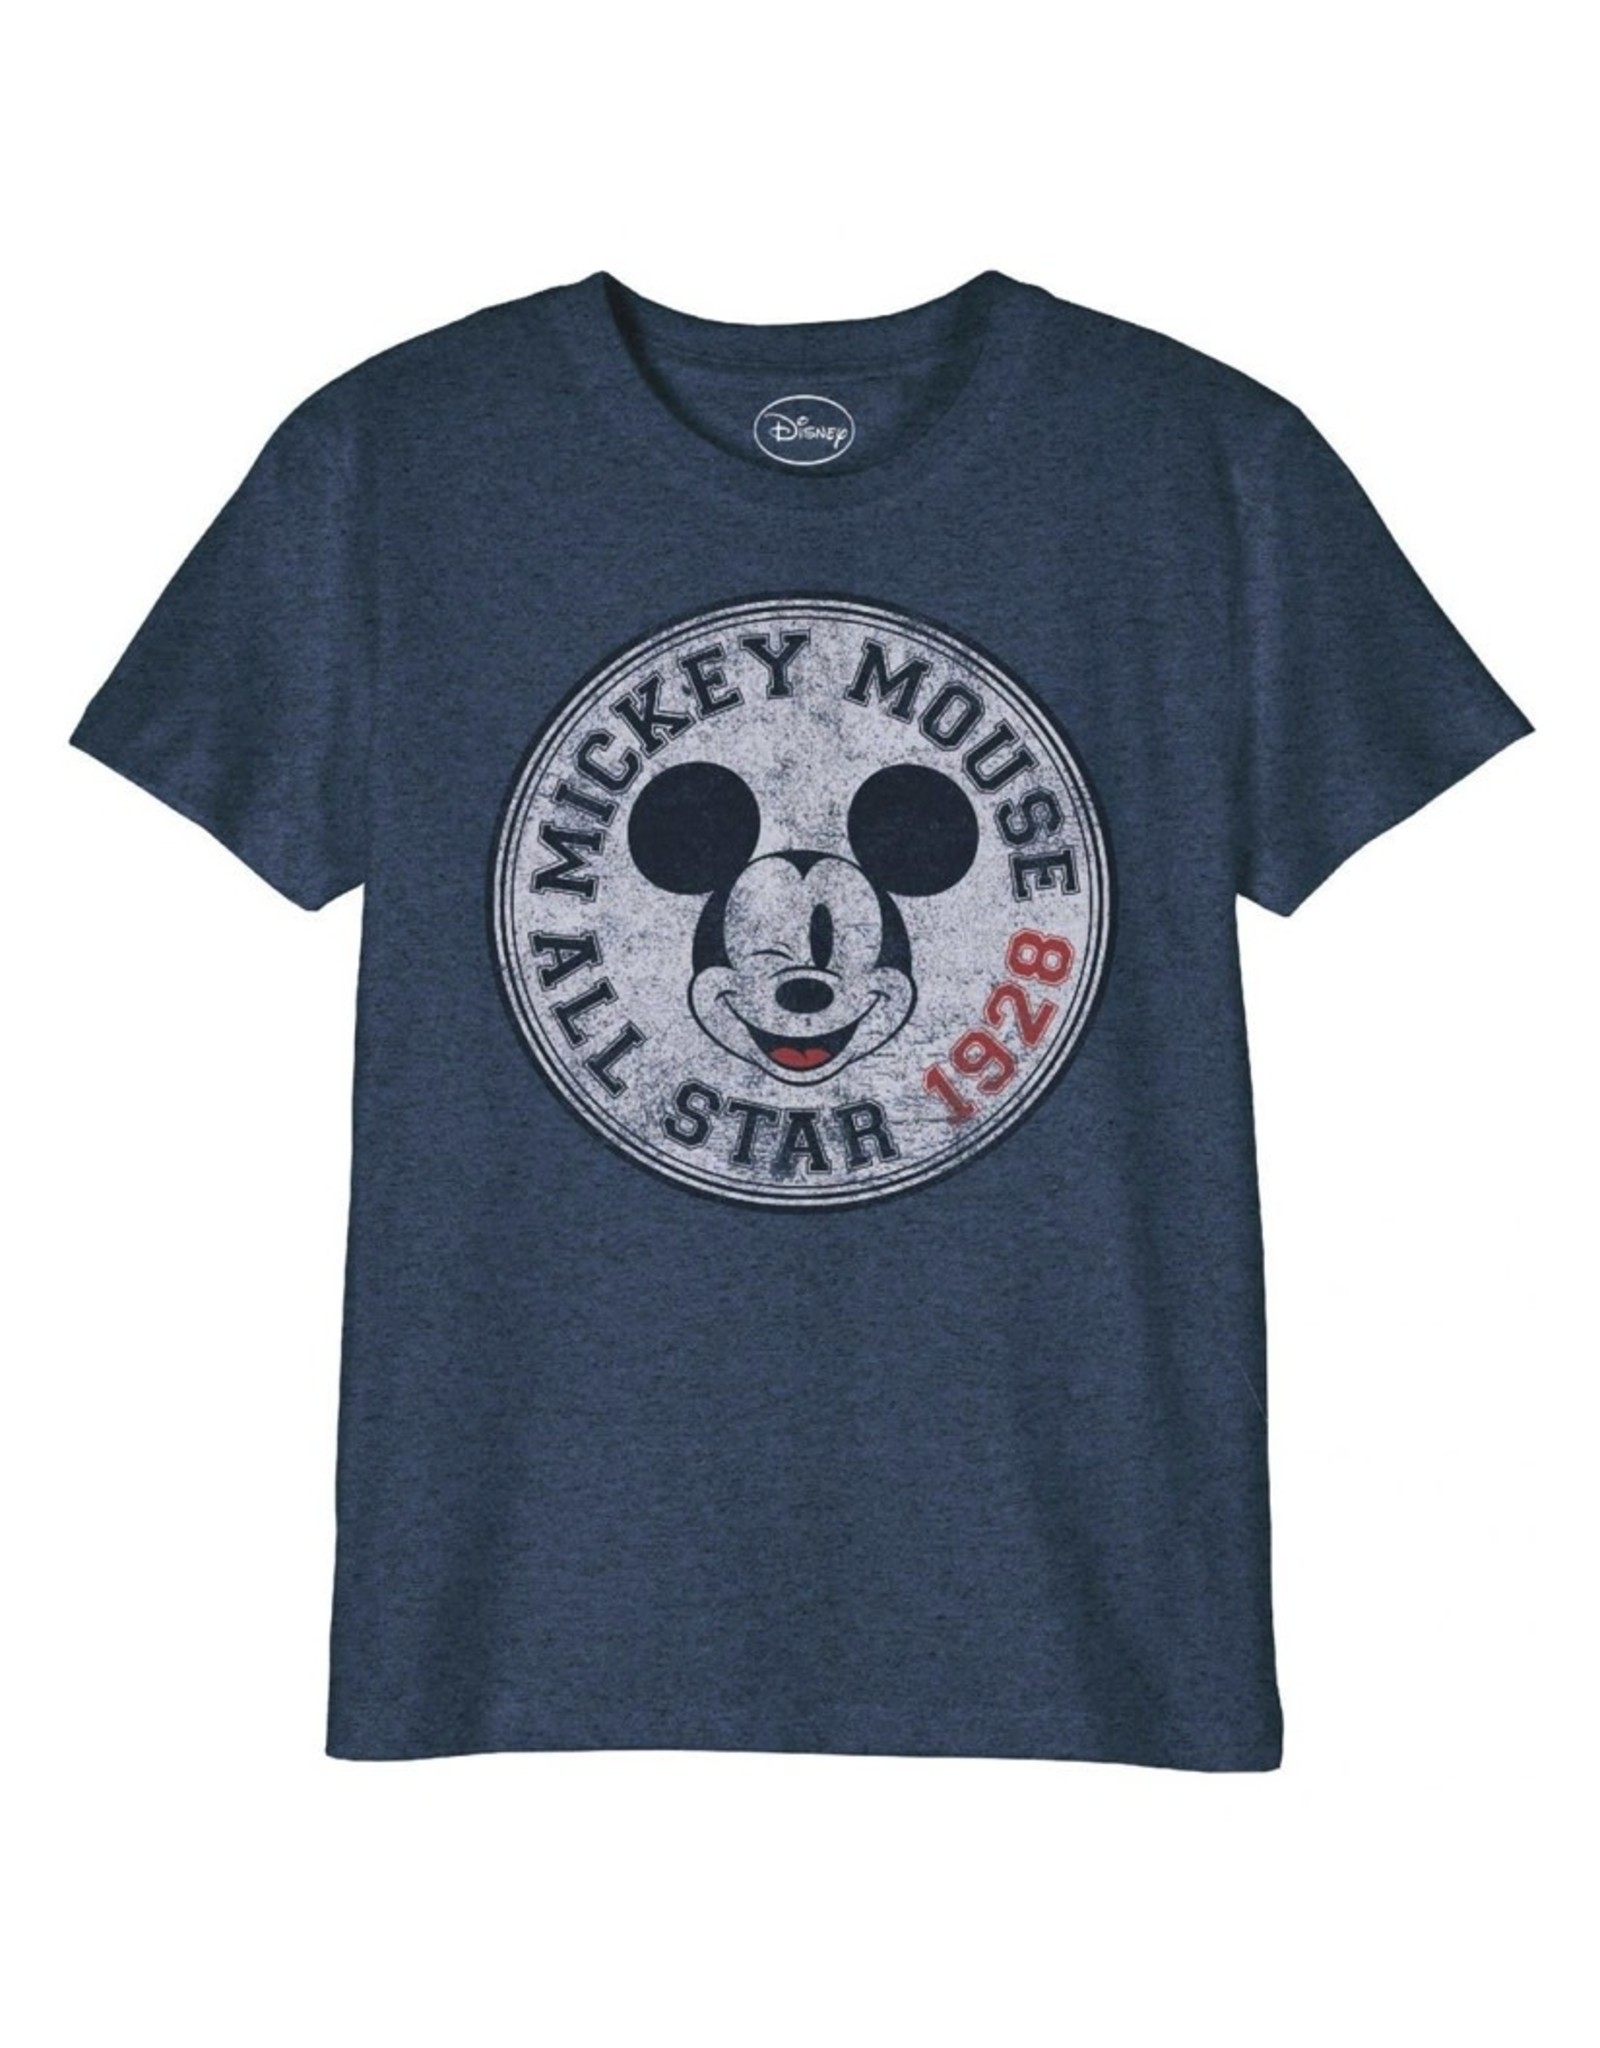 Disney MICKEY MOUSE T-Shirt Kids -  All Star 1928 (8 Years)